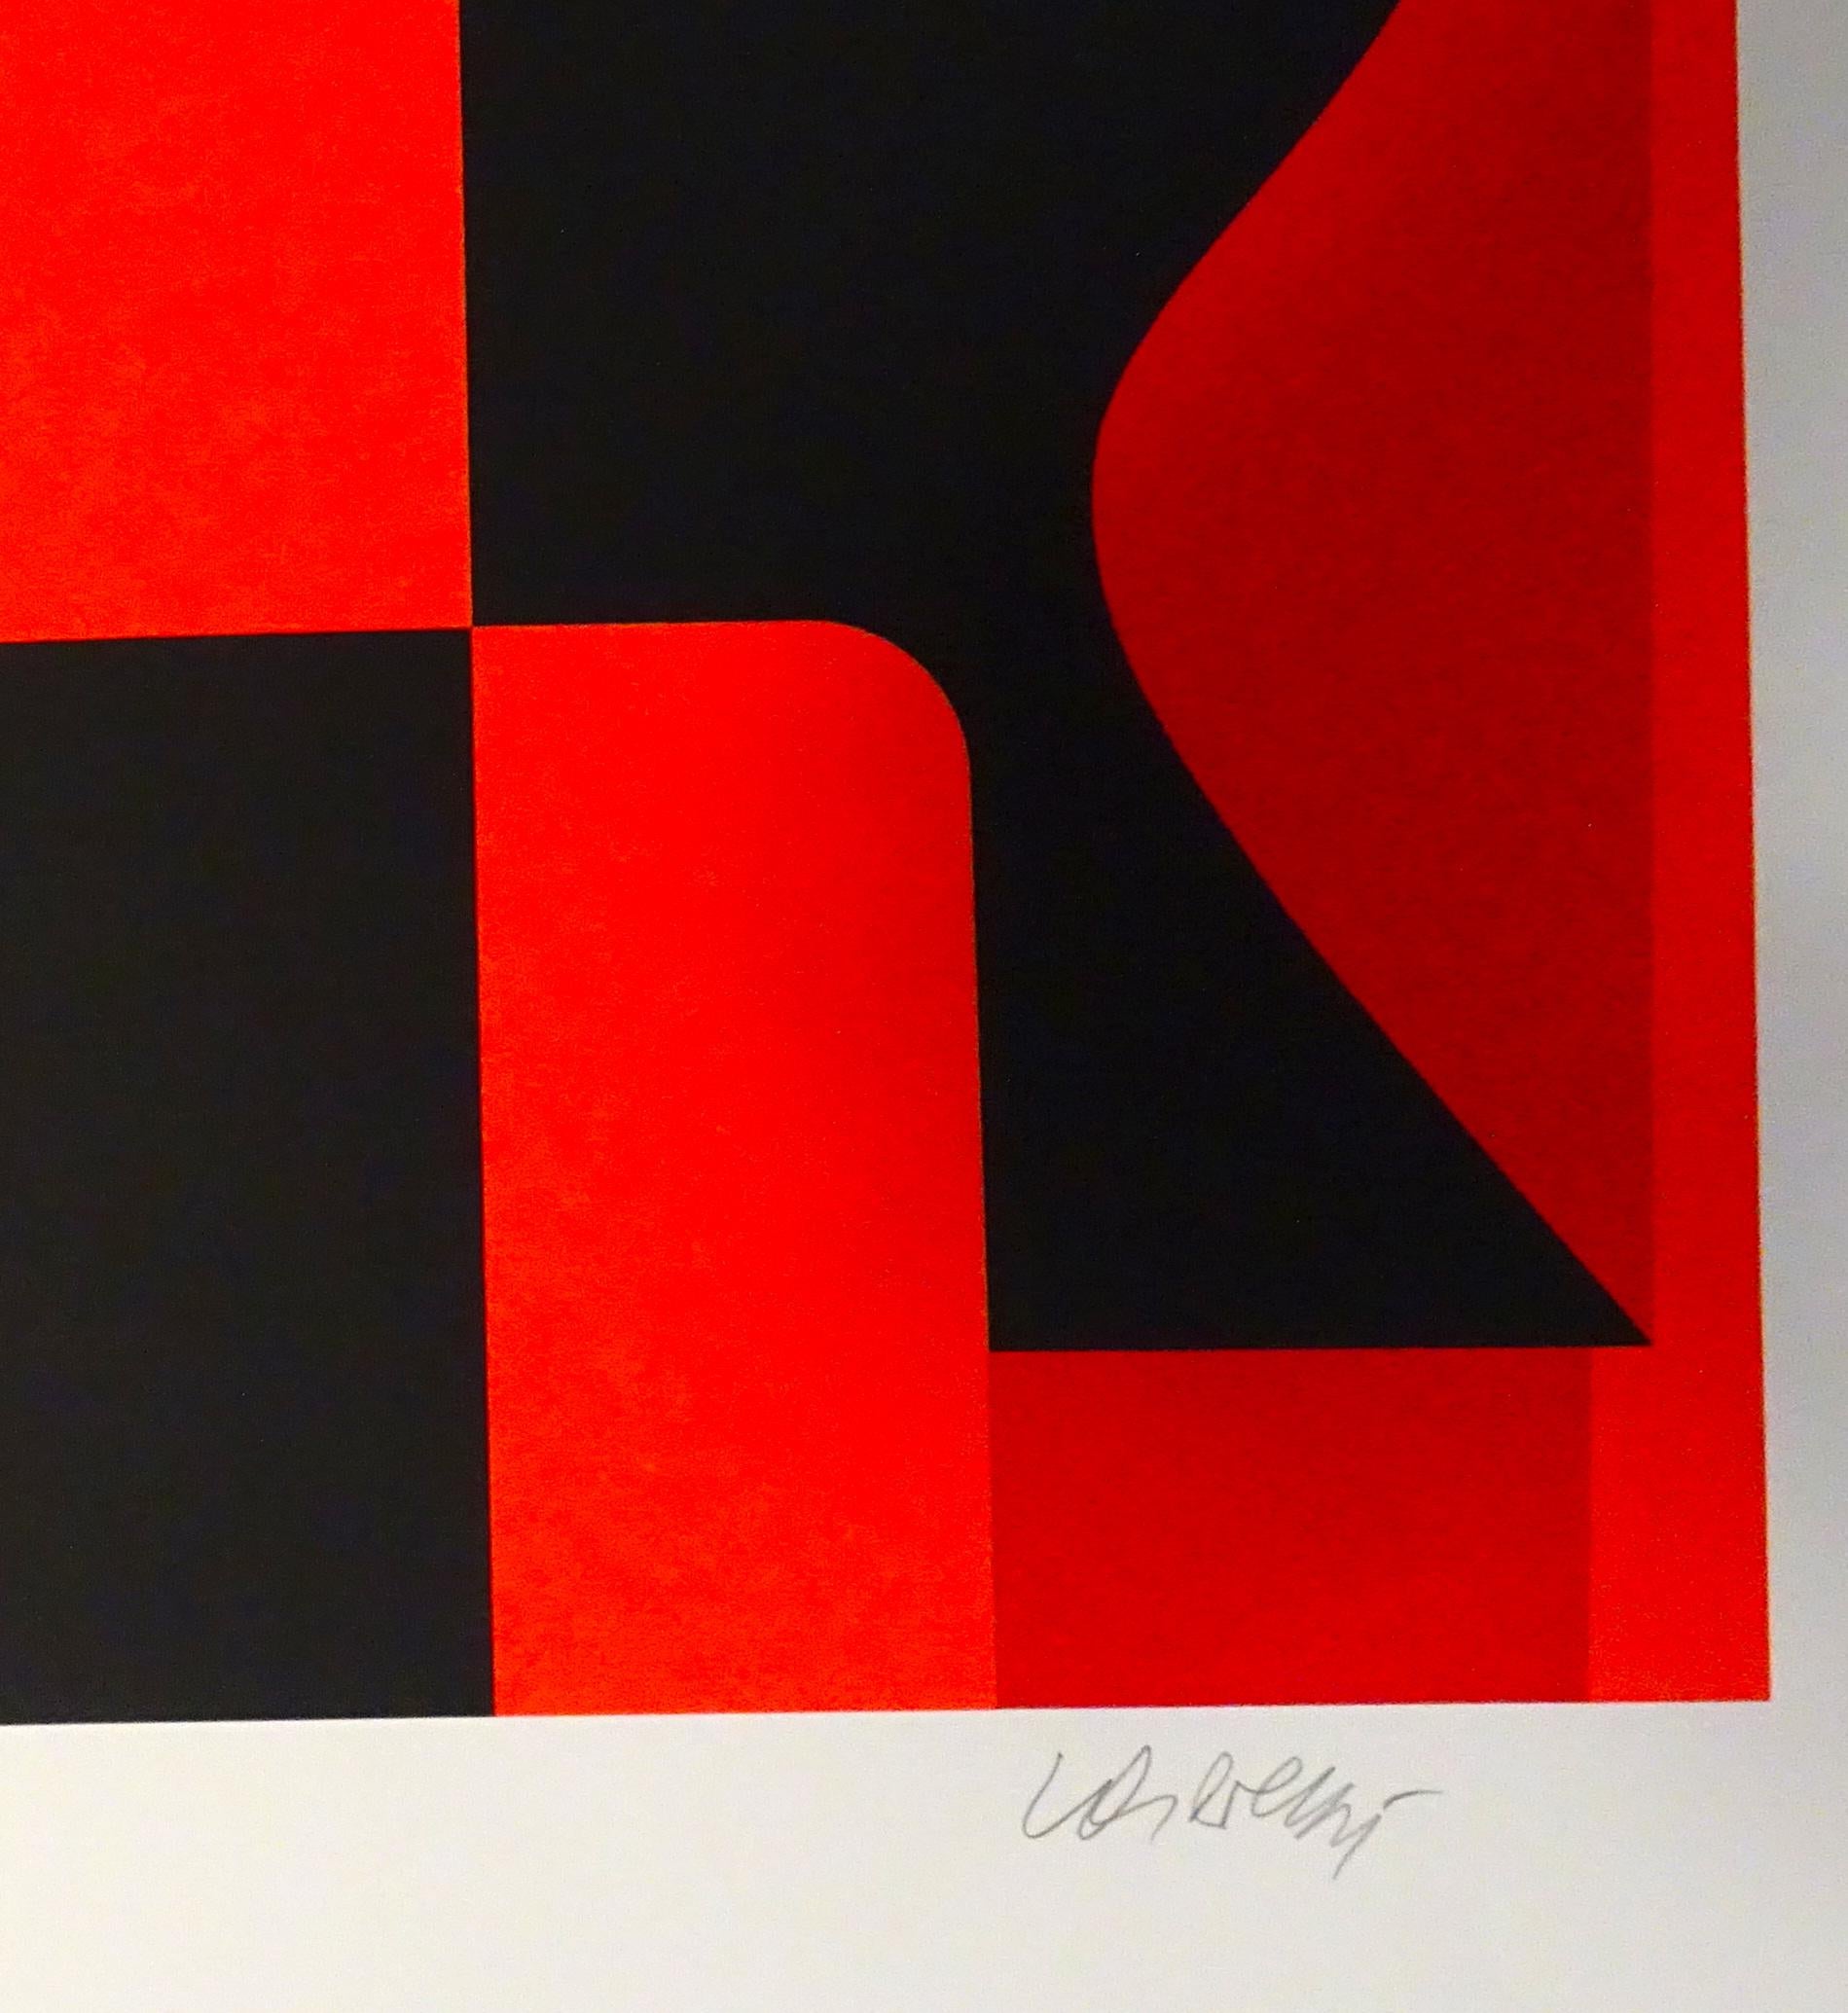 Mixed Red Composition - 1980s - Victor Vasarely - Serigraph - Contemporary 1